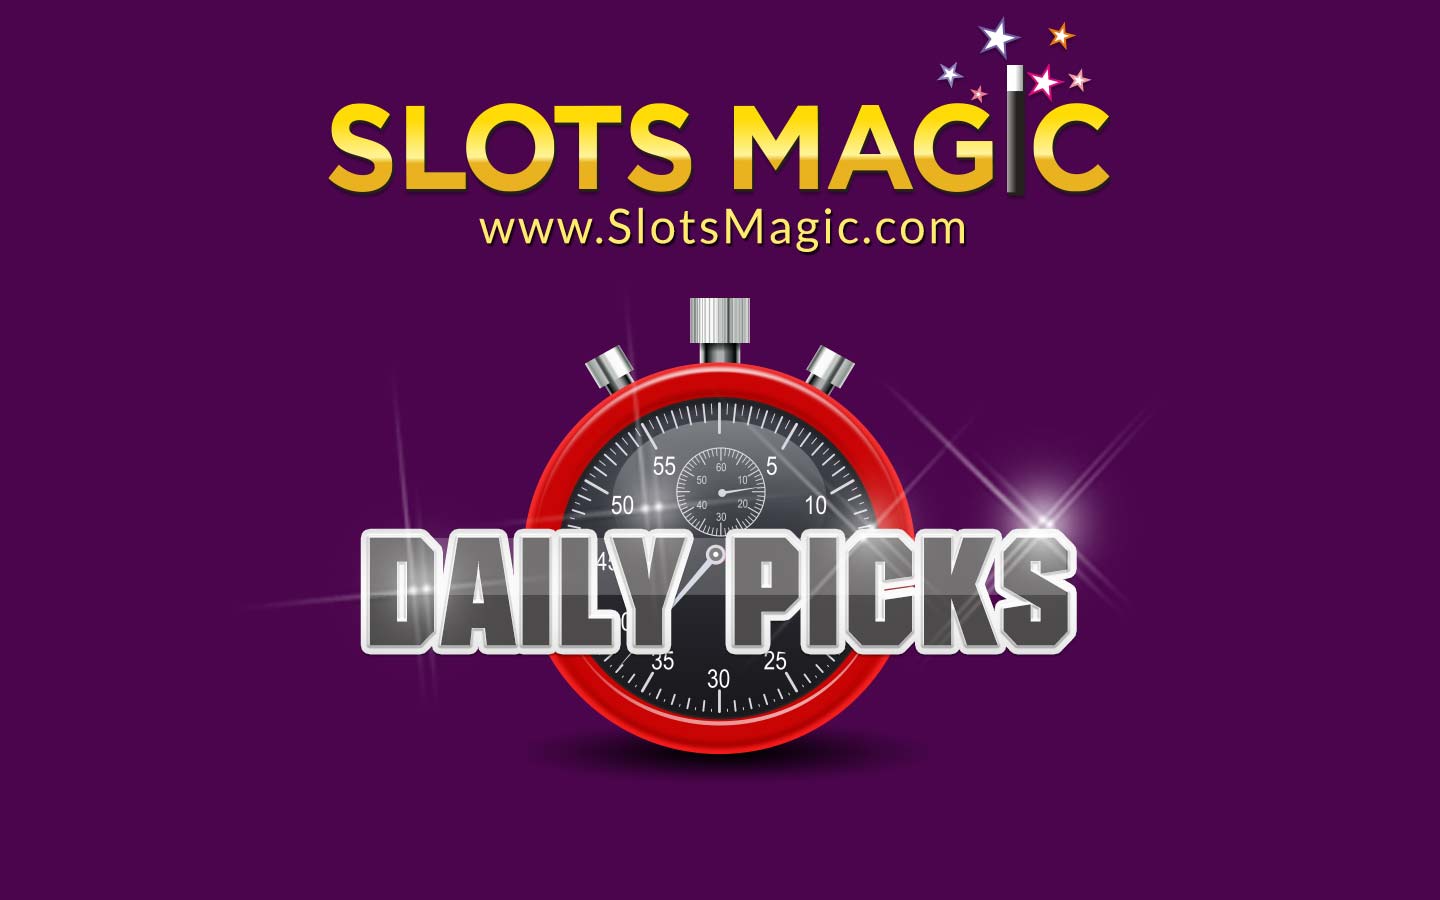 Daily promos from Slots Magic casino